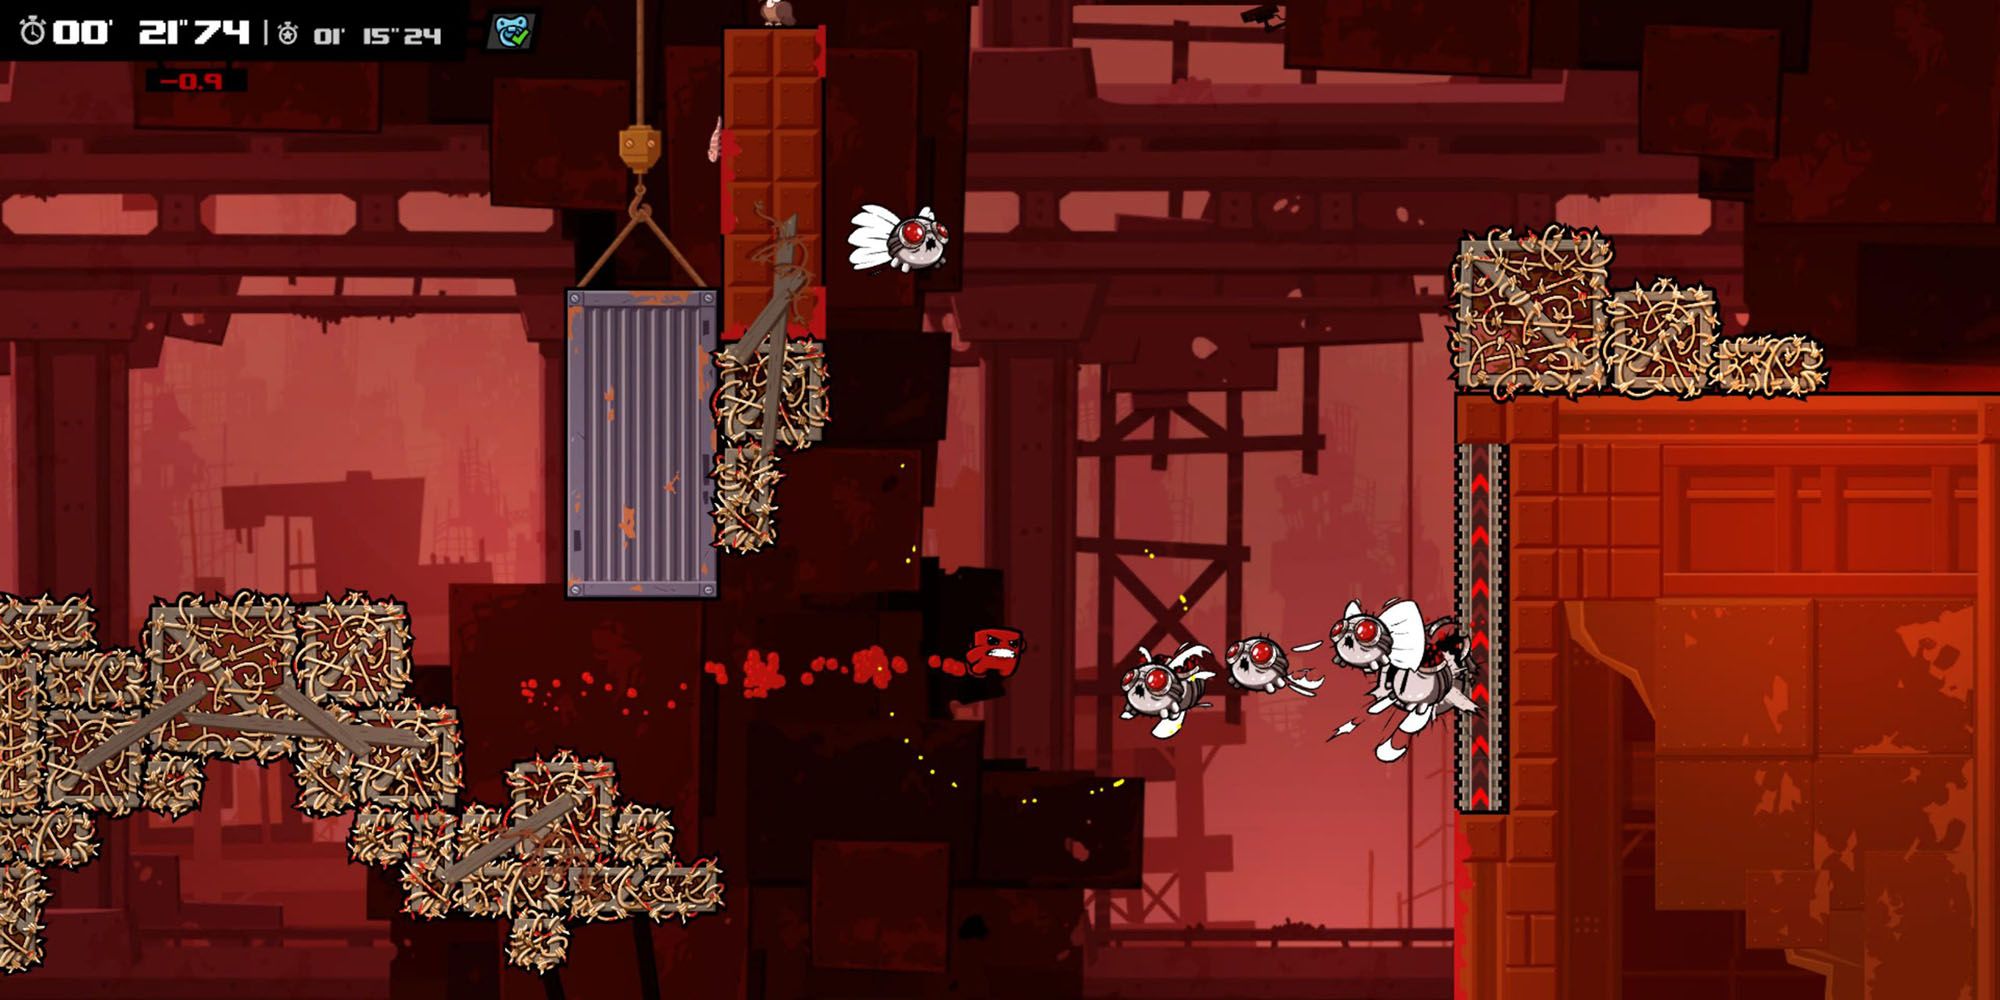 Encountering trouble in Super Meat Boy Forever